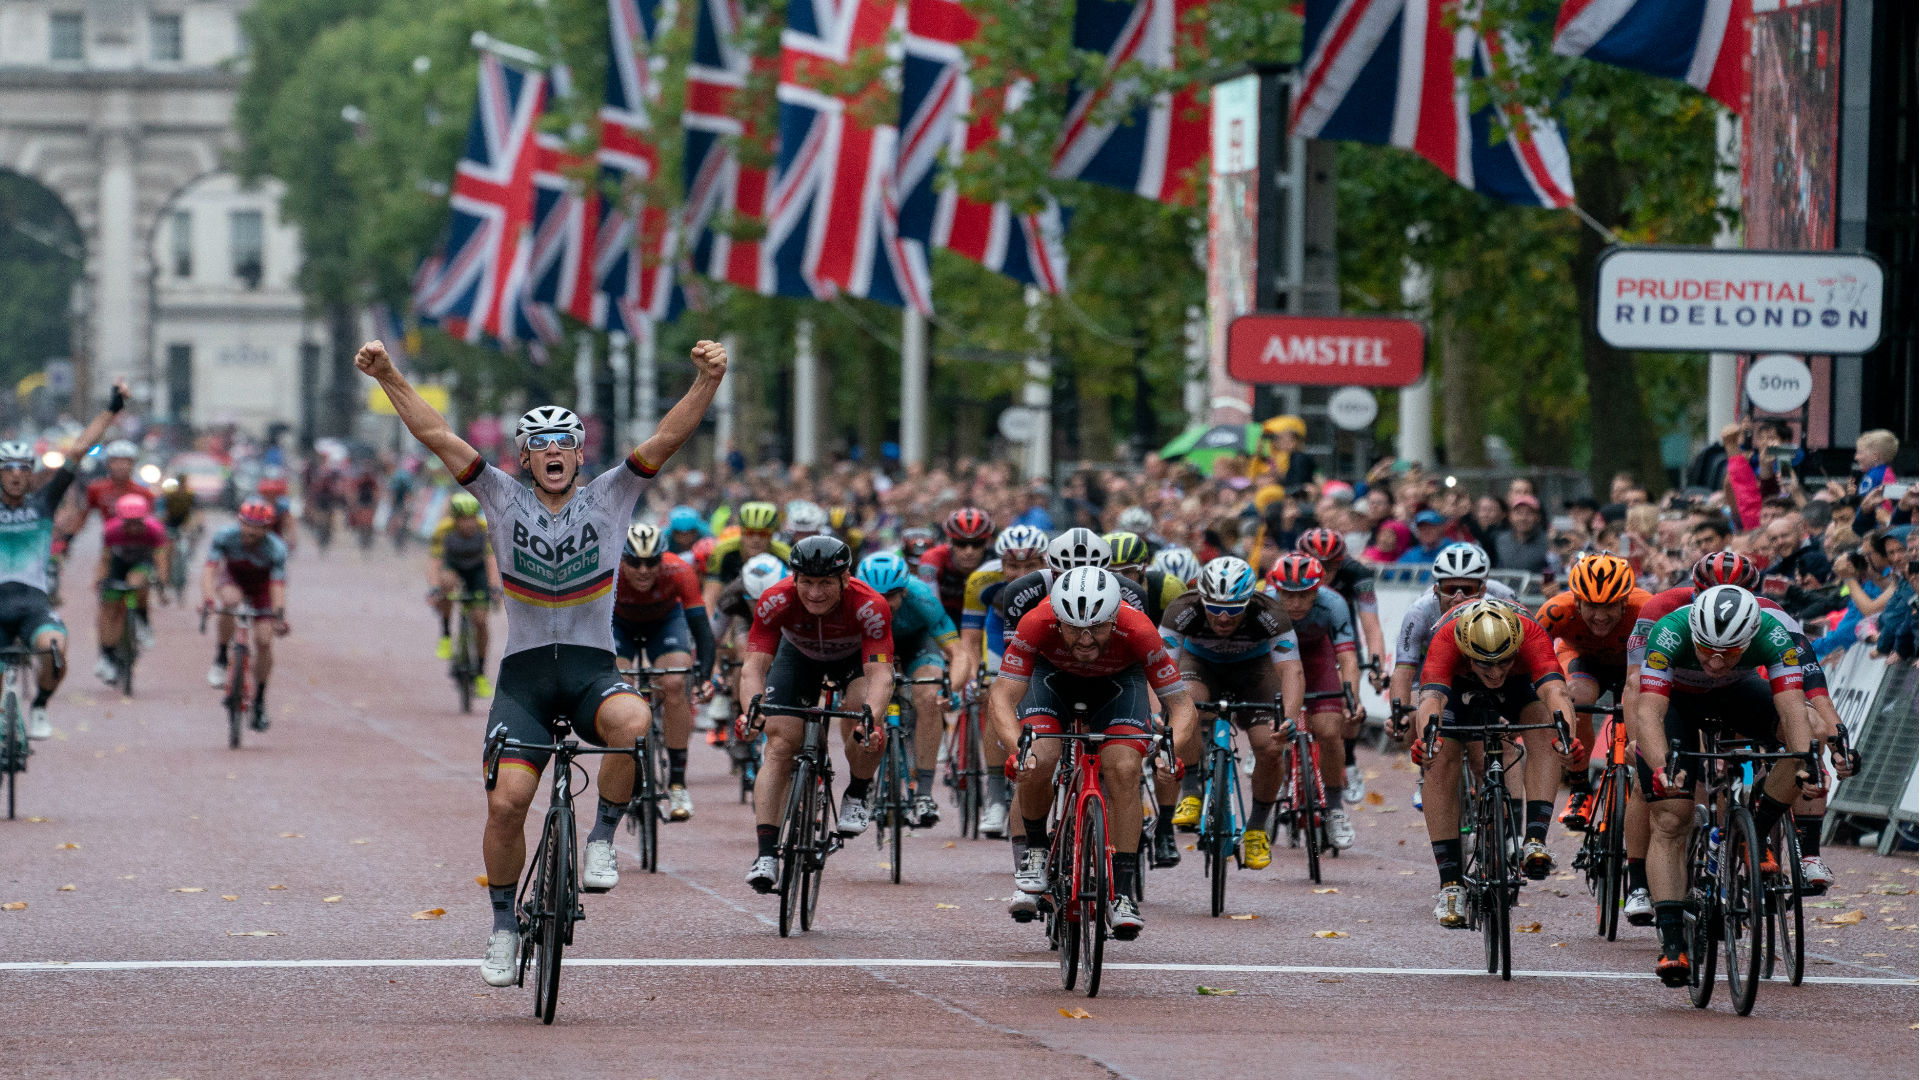 Cyclist celebrating at the Prudential RideLondon Classic. Image courtesy of RideLondon.